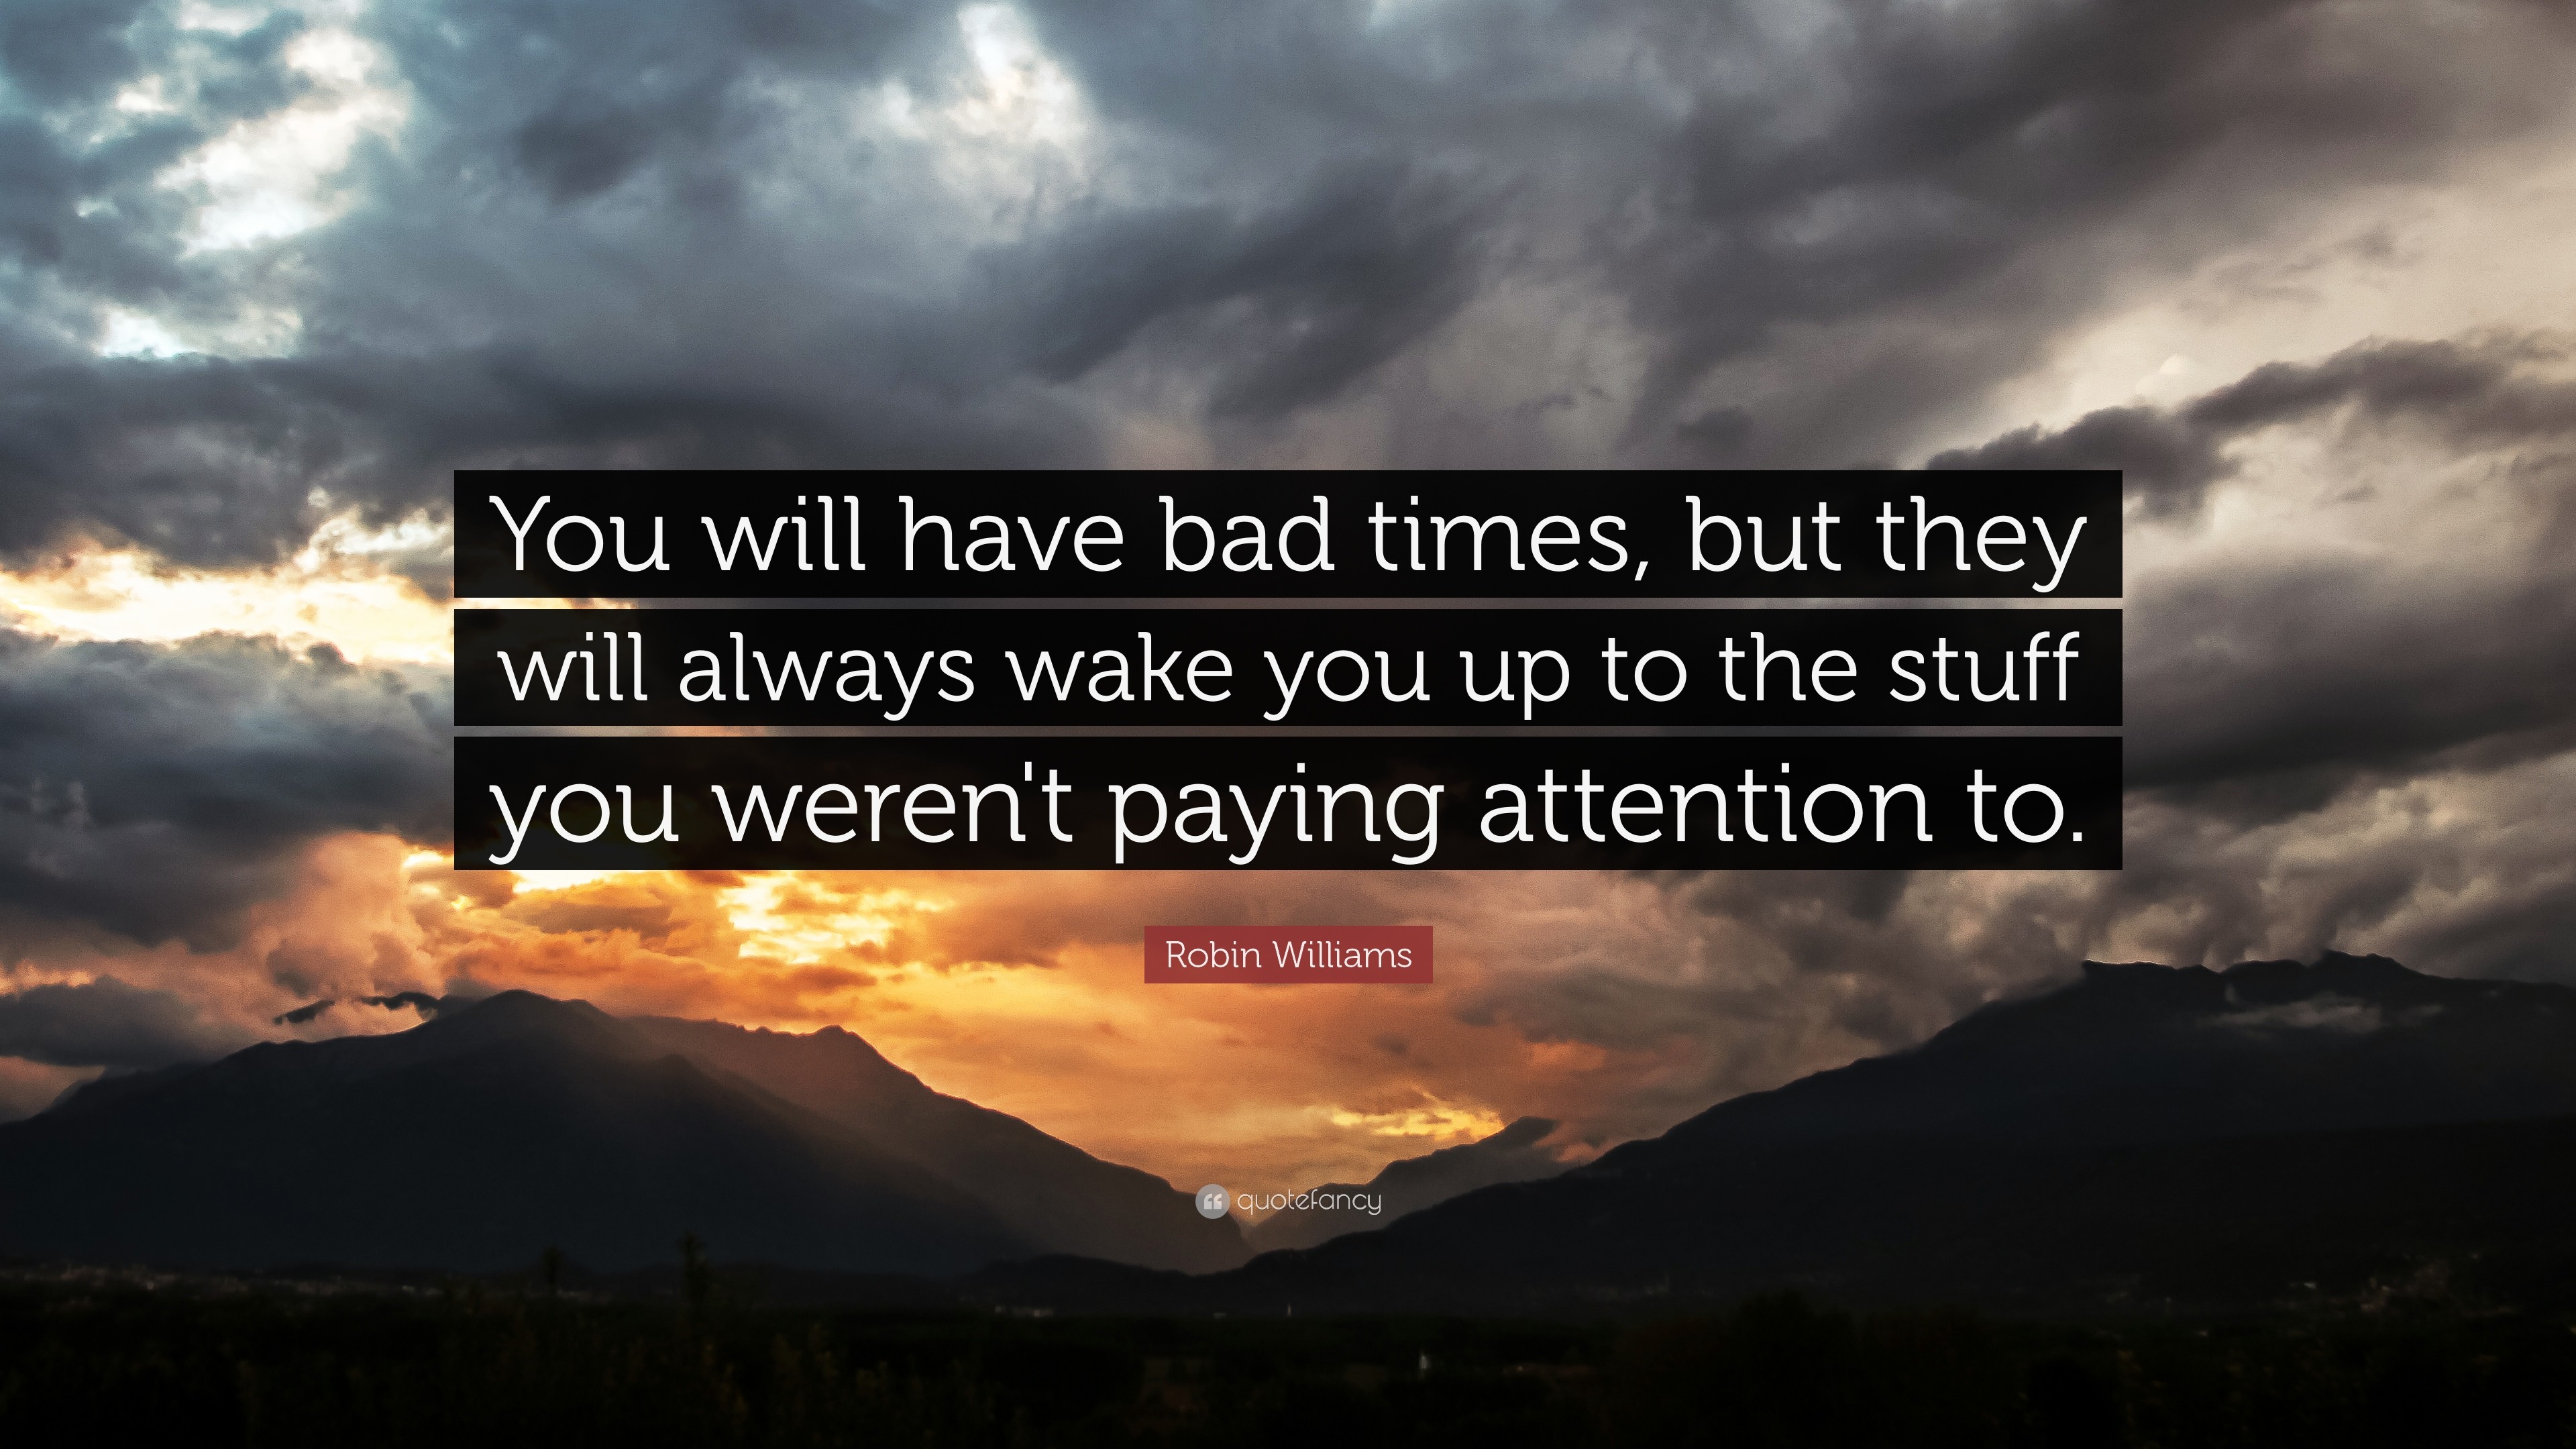 3840x2160 Robin Williams Quote: “You will have bad times, but they will always wake